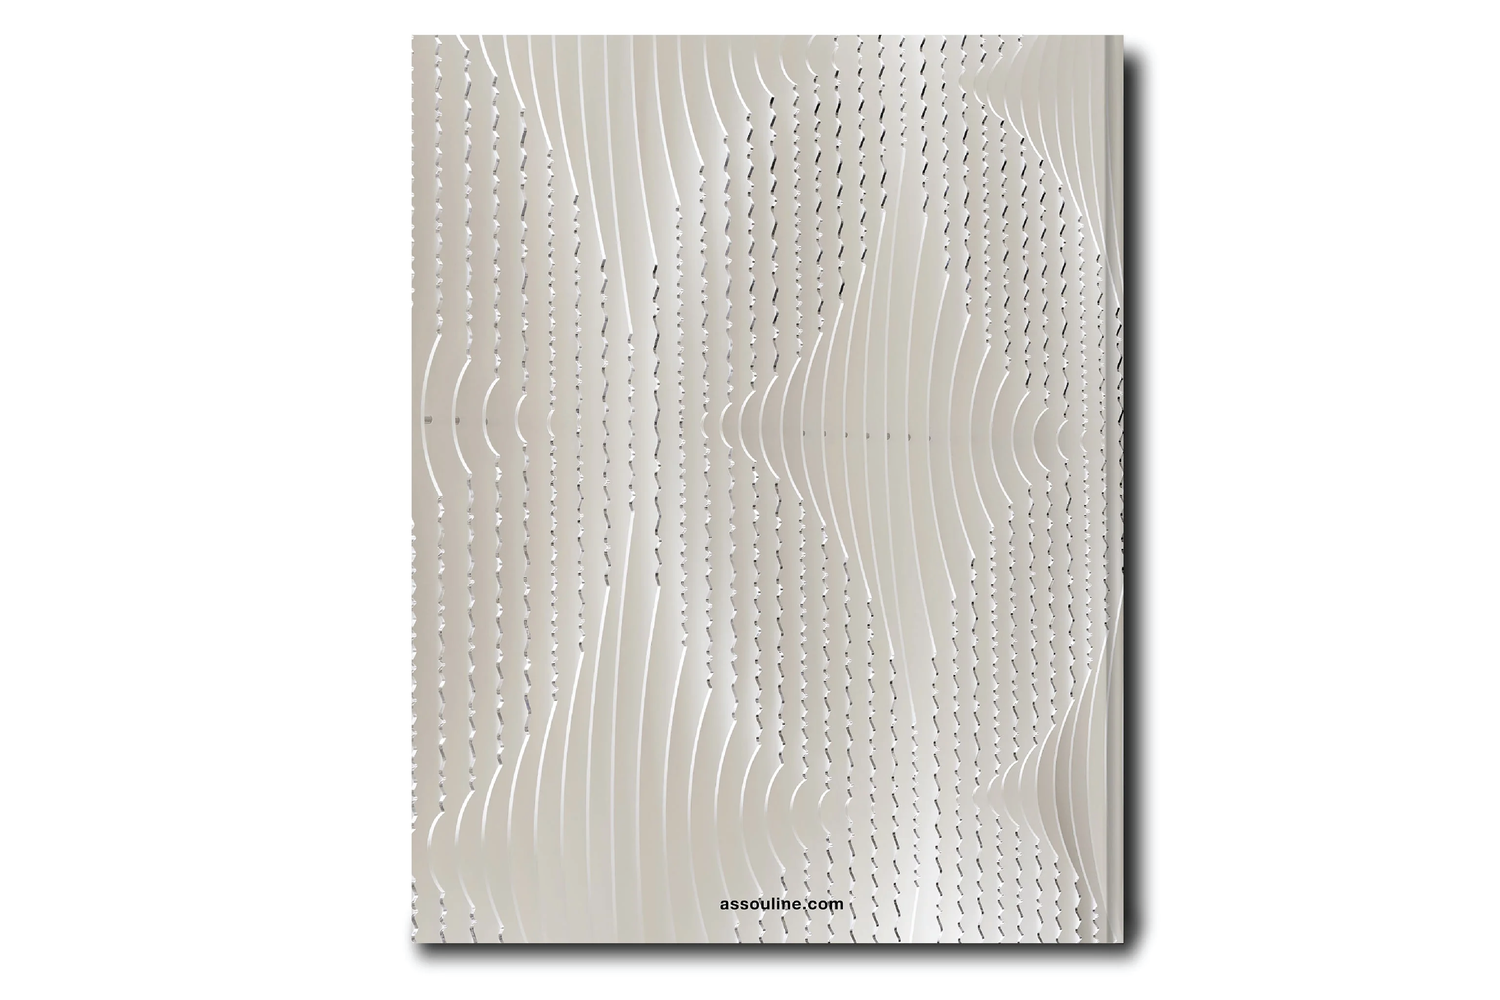 ASSOULINE Louis Vuitton Skin: Architecture of Luxury (New York City  Edition) Coffee Table Book – Cayman's